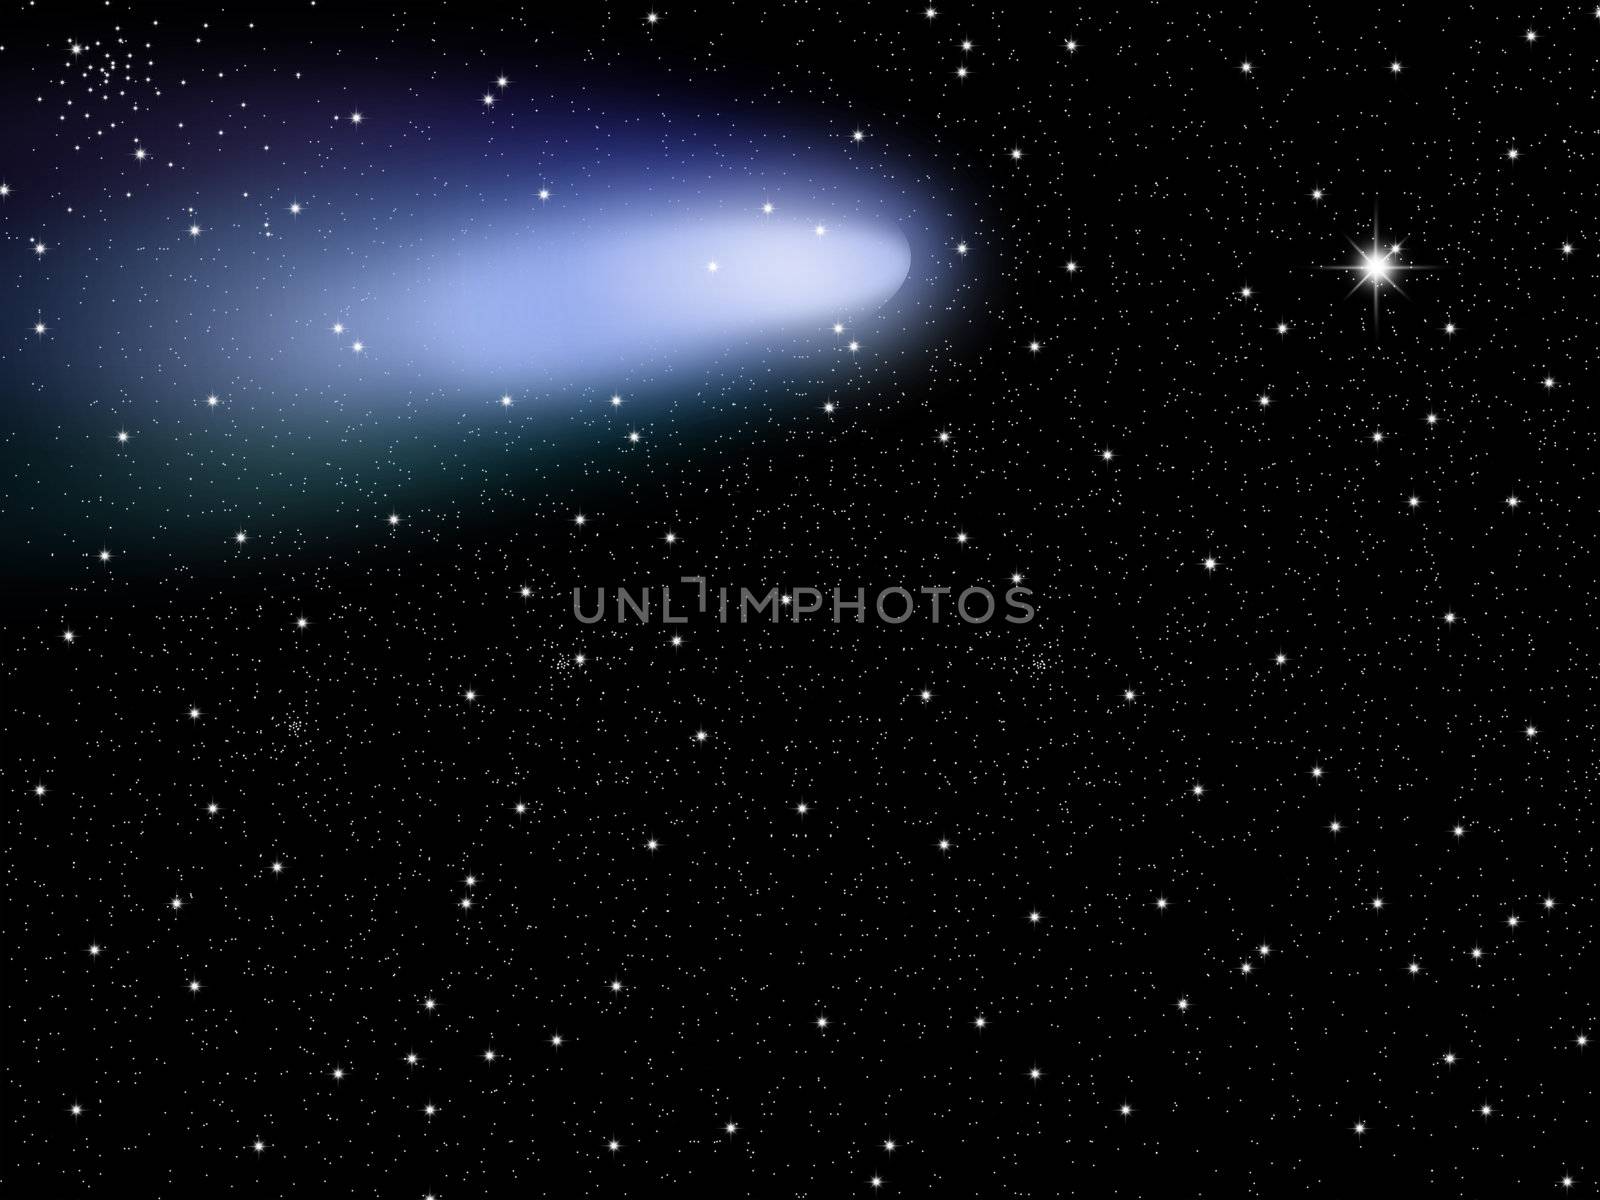 Comet on a background of star congestions. Space, astronomy